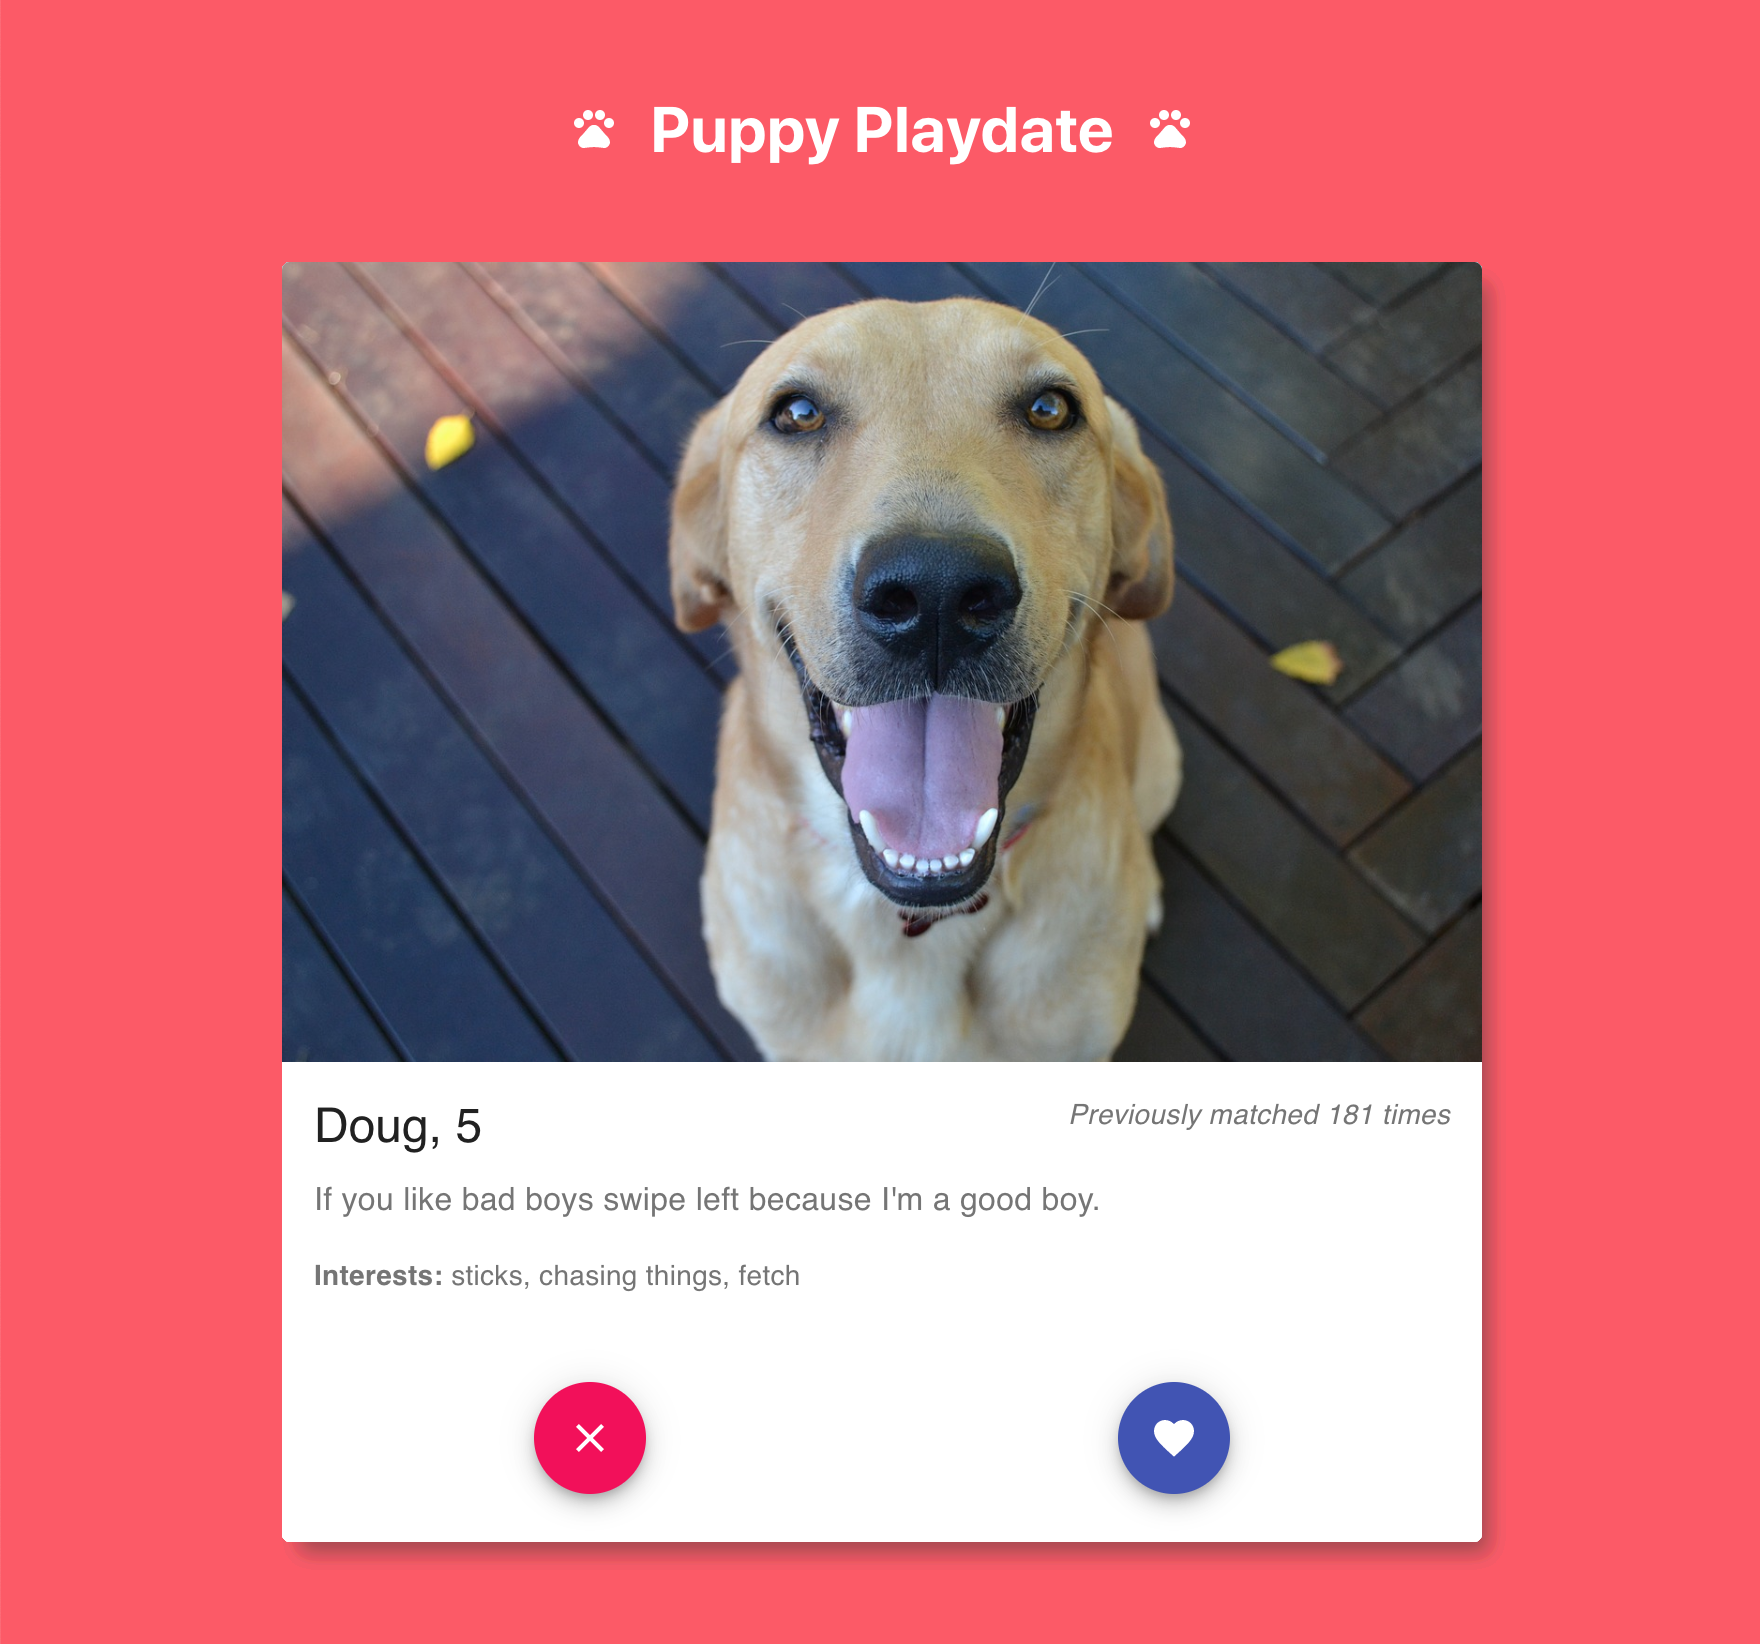 Puppy Playdate, the Tinder app for dogs